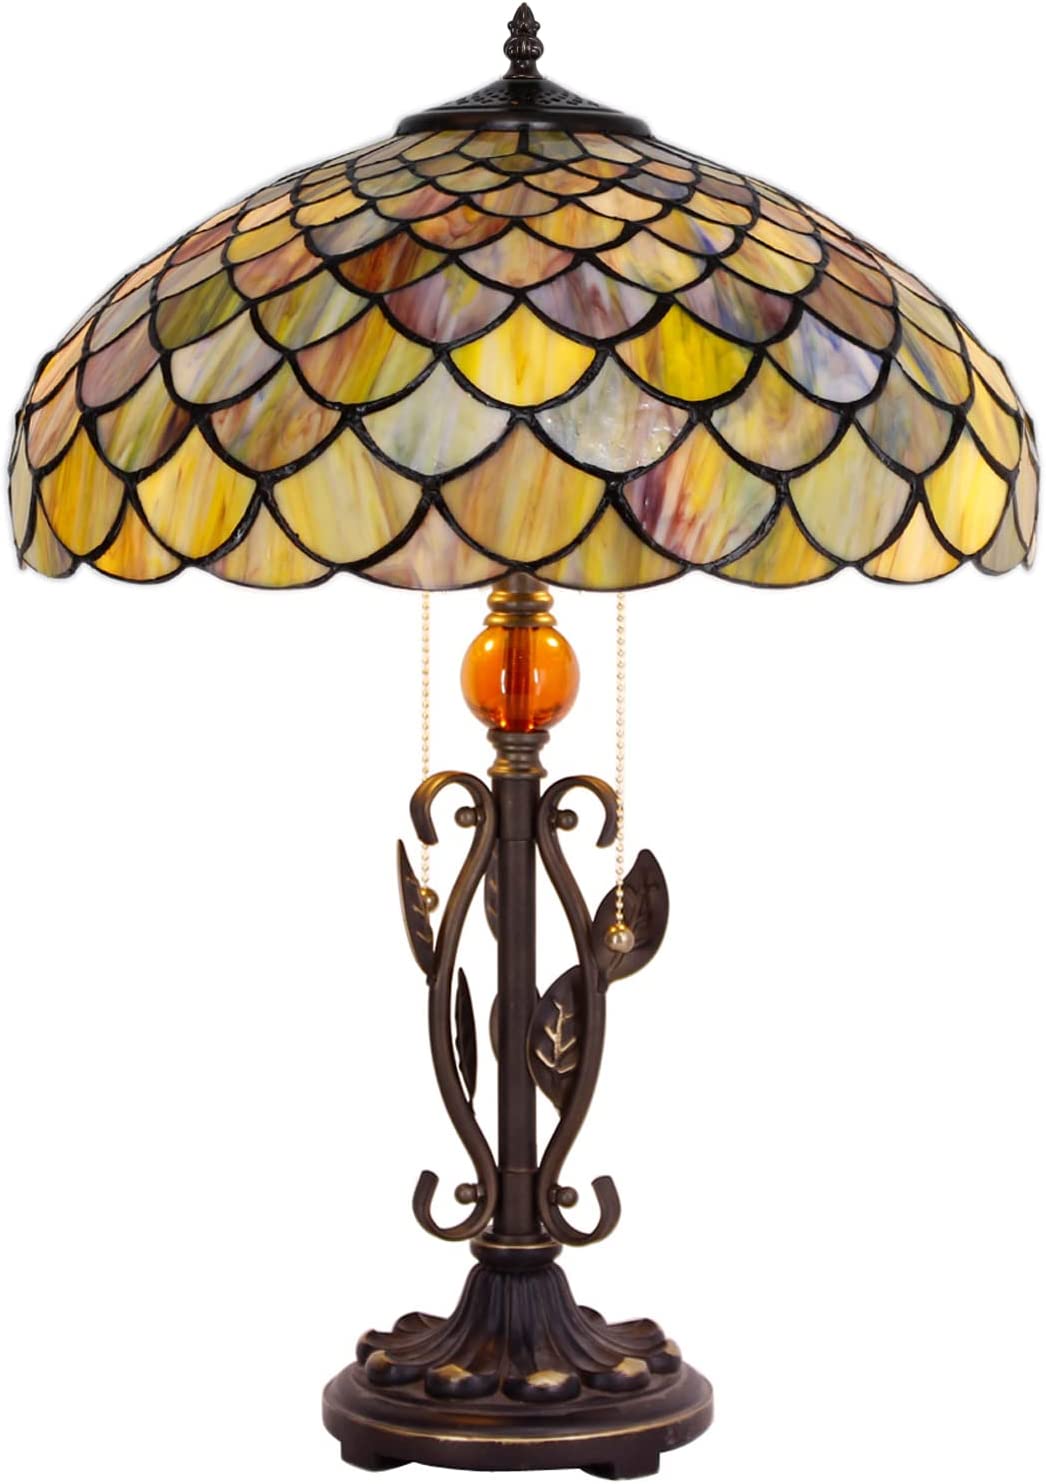 Werfactory® Tiffany Table Lamp Stained Glass Lamp Fish Scales Desk Light W16H24 Inch